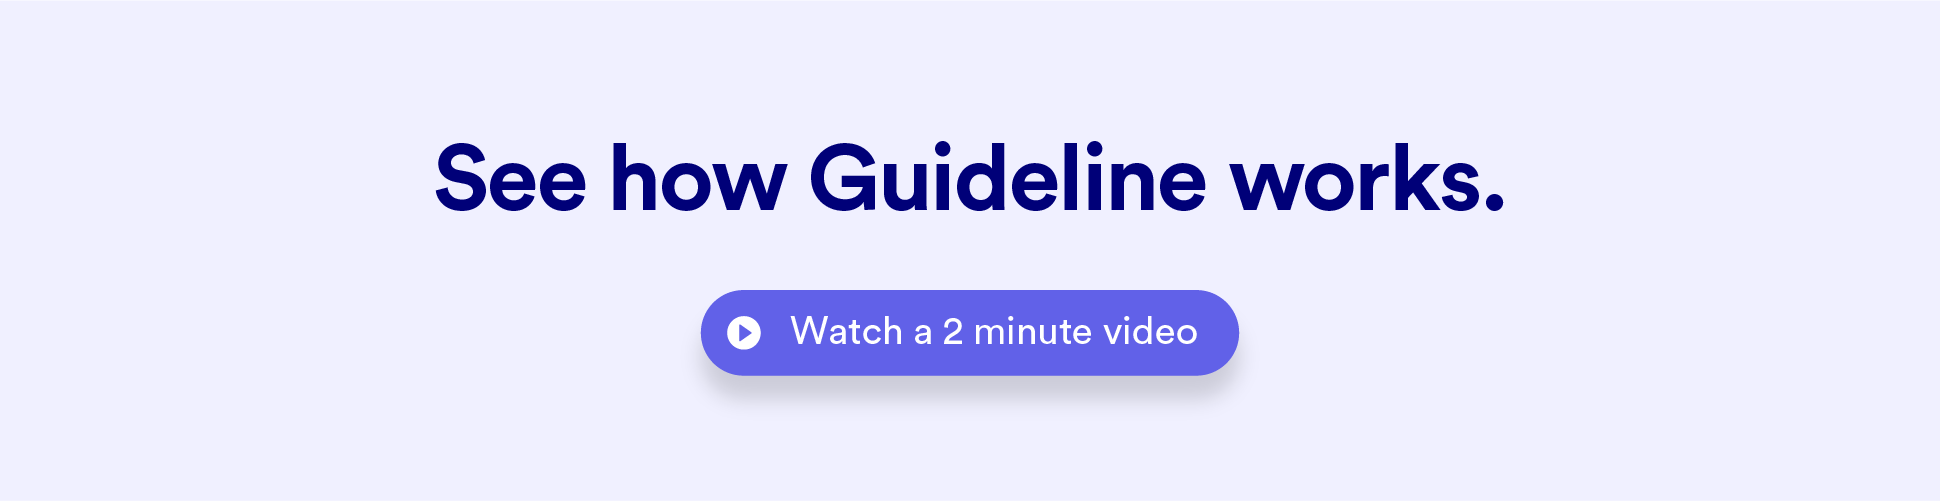 See how Guideline works